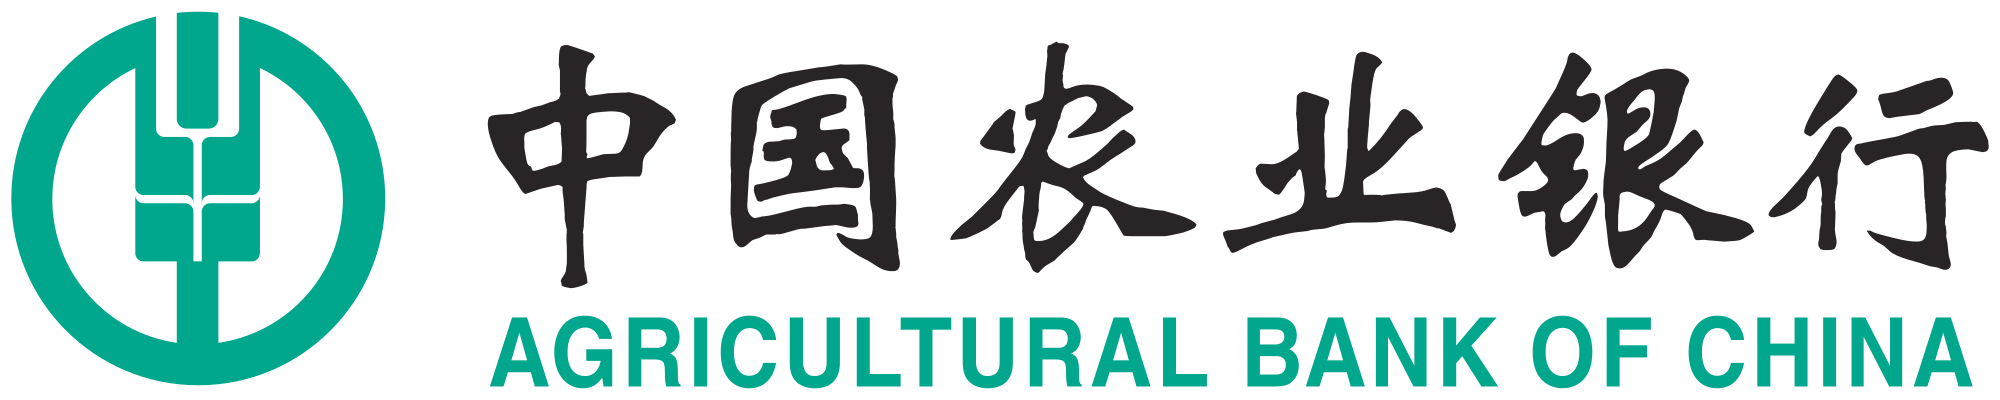 Agricultural Bank Of China Logo Background Png Image Png Play